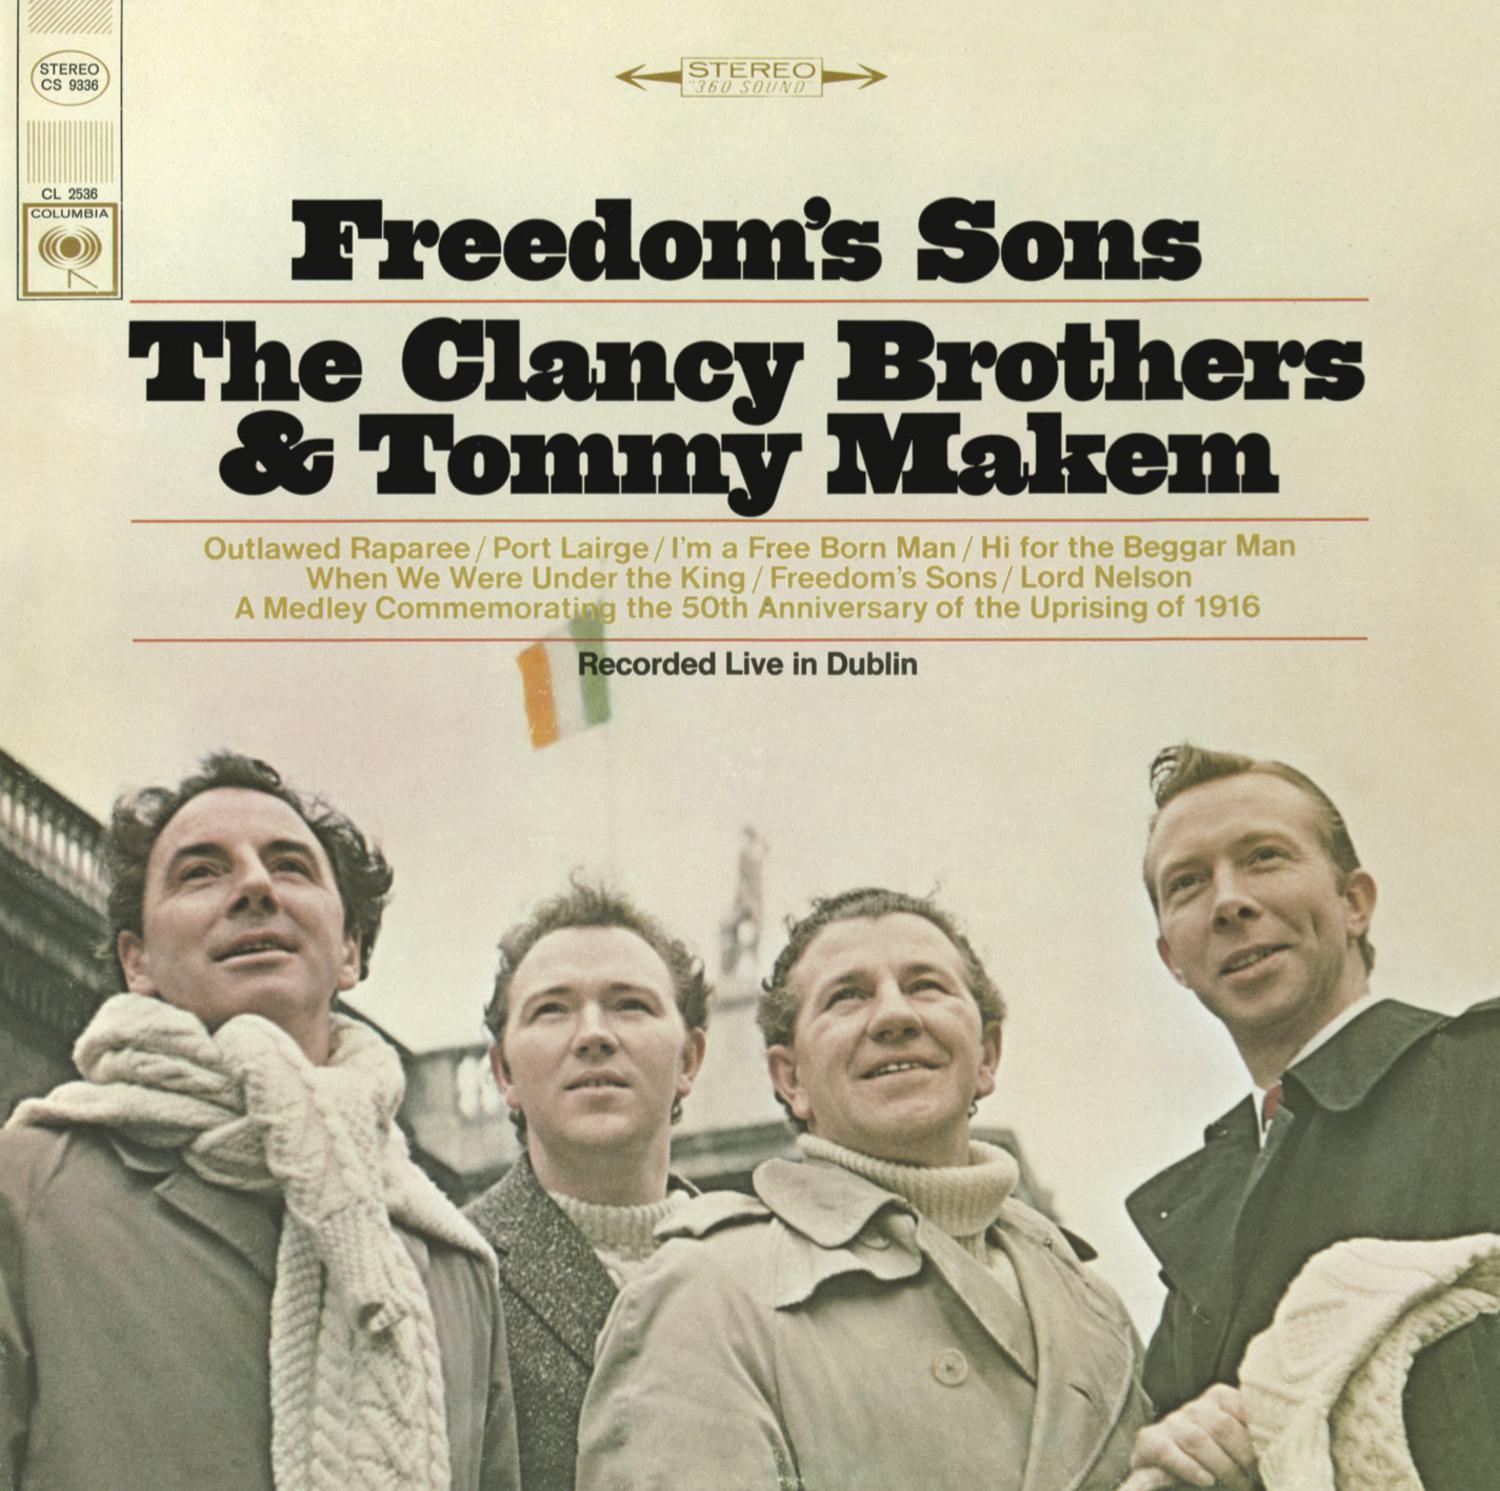 The Clancy Brothers & Tommy Makem – Freedom’s Sons (1966/2015) [AcousticSounds FLAC 24bit/96kHz]